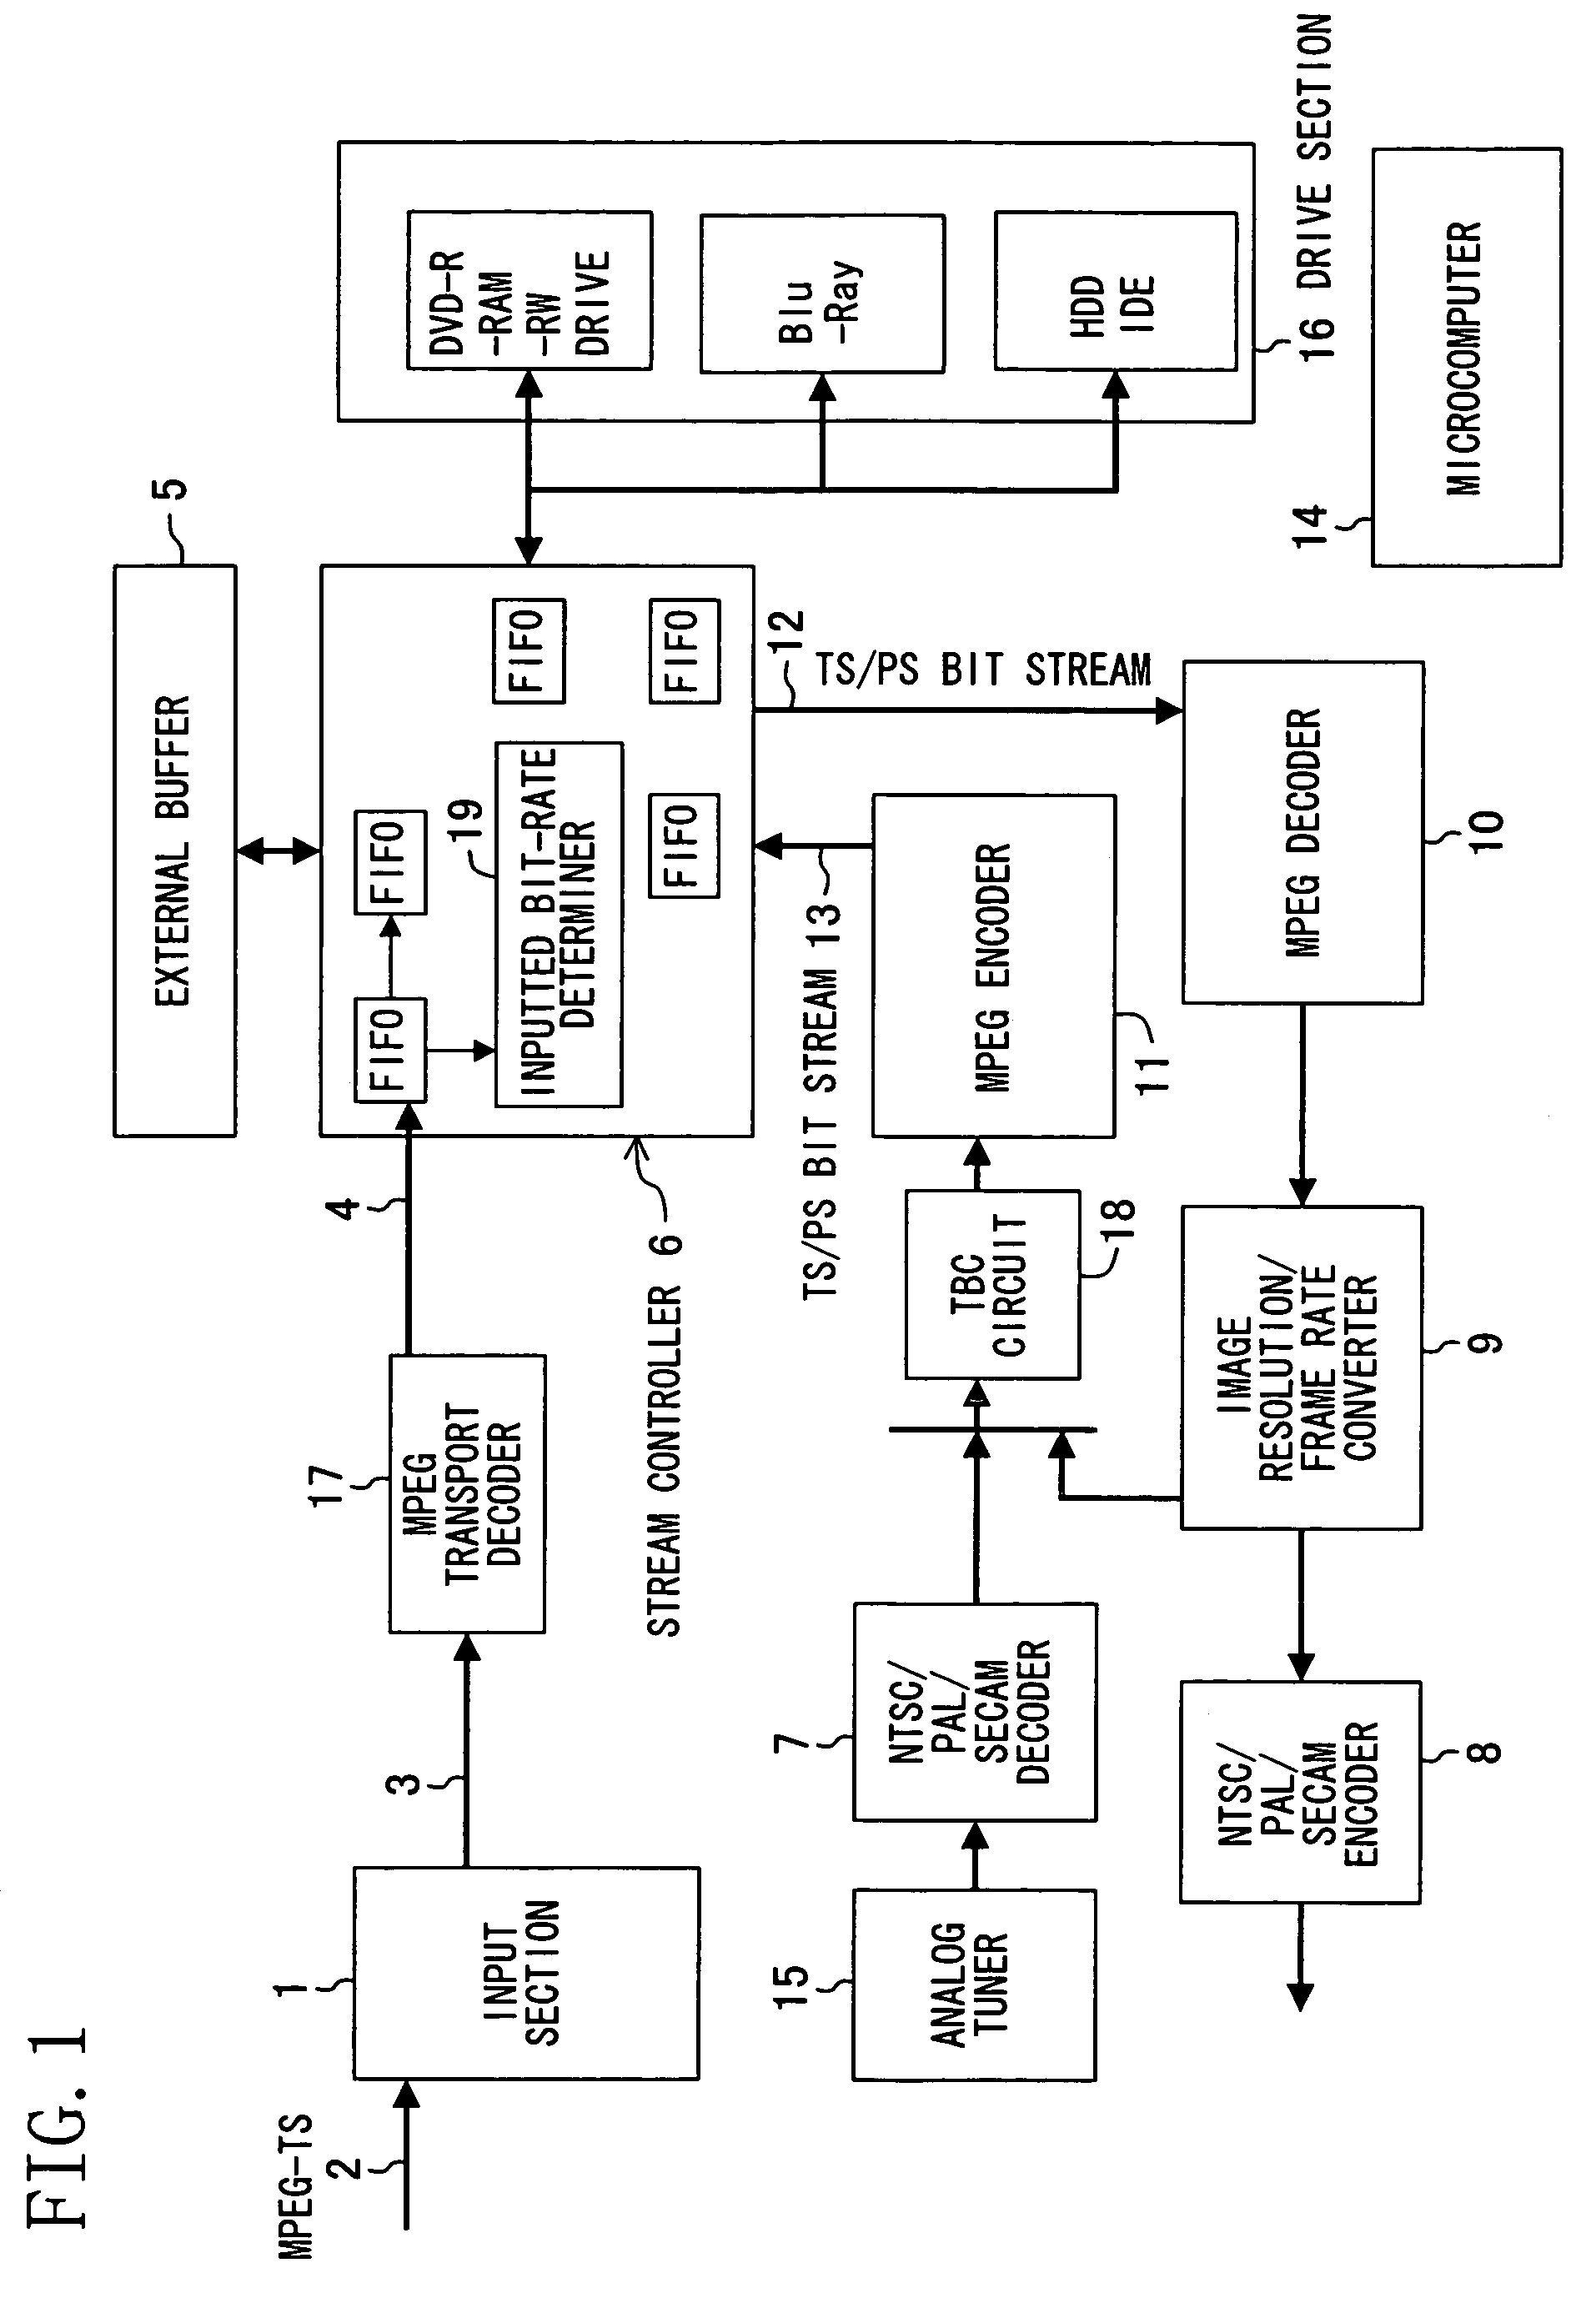 Method and device for ensuring storage time for digital broadcast